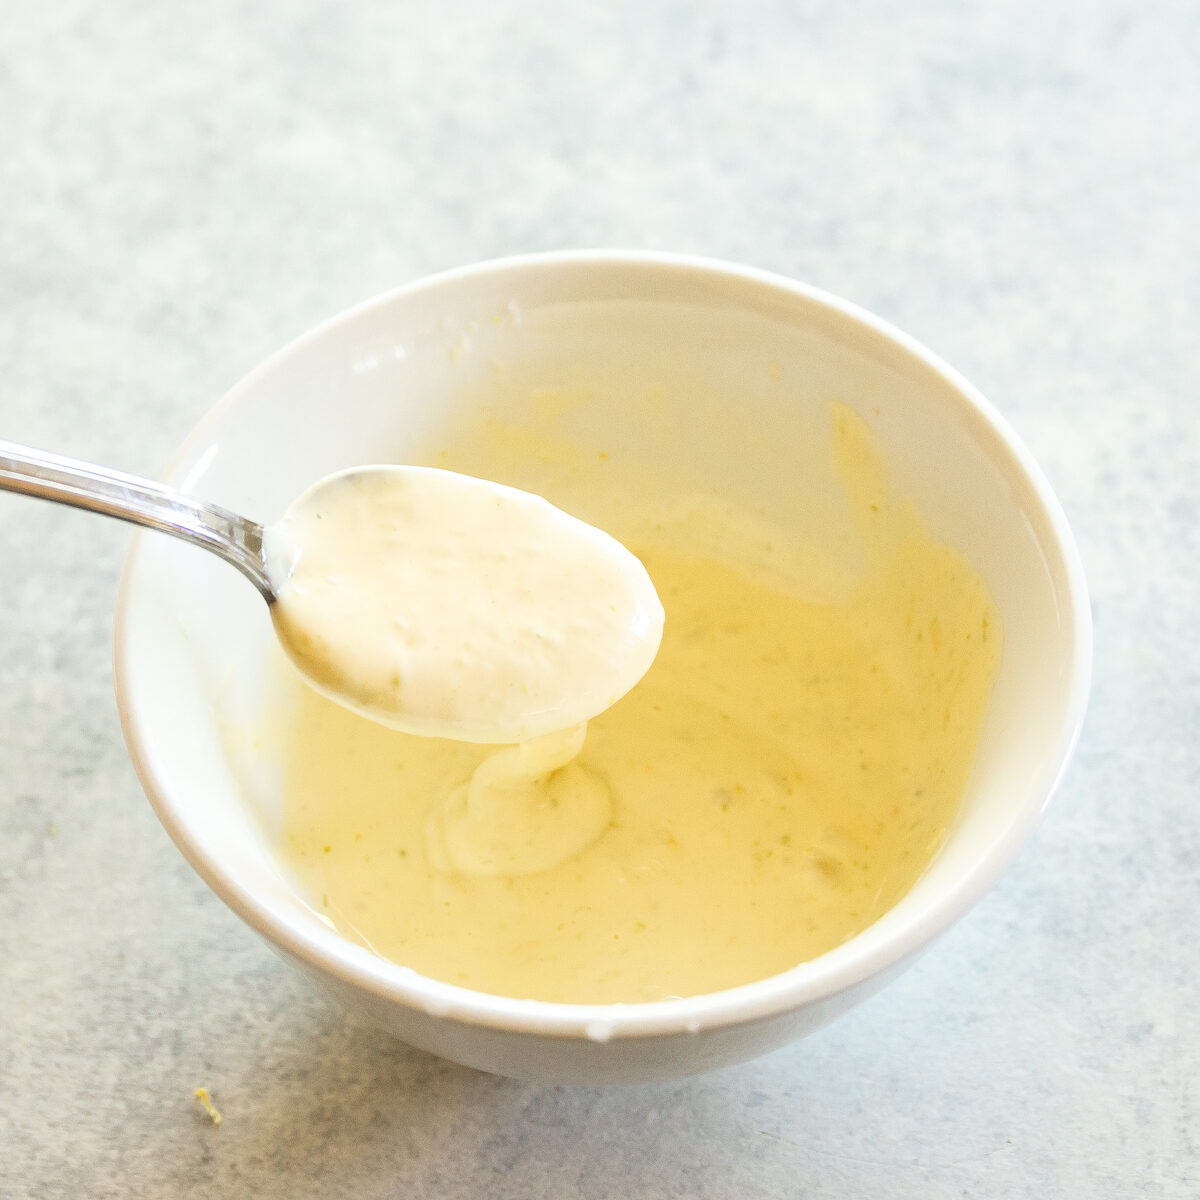 White bowl of creamy pale yellow sauce. There is a spoon lifting some out and it is dripping back into the bowl.